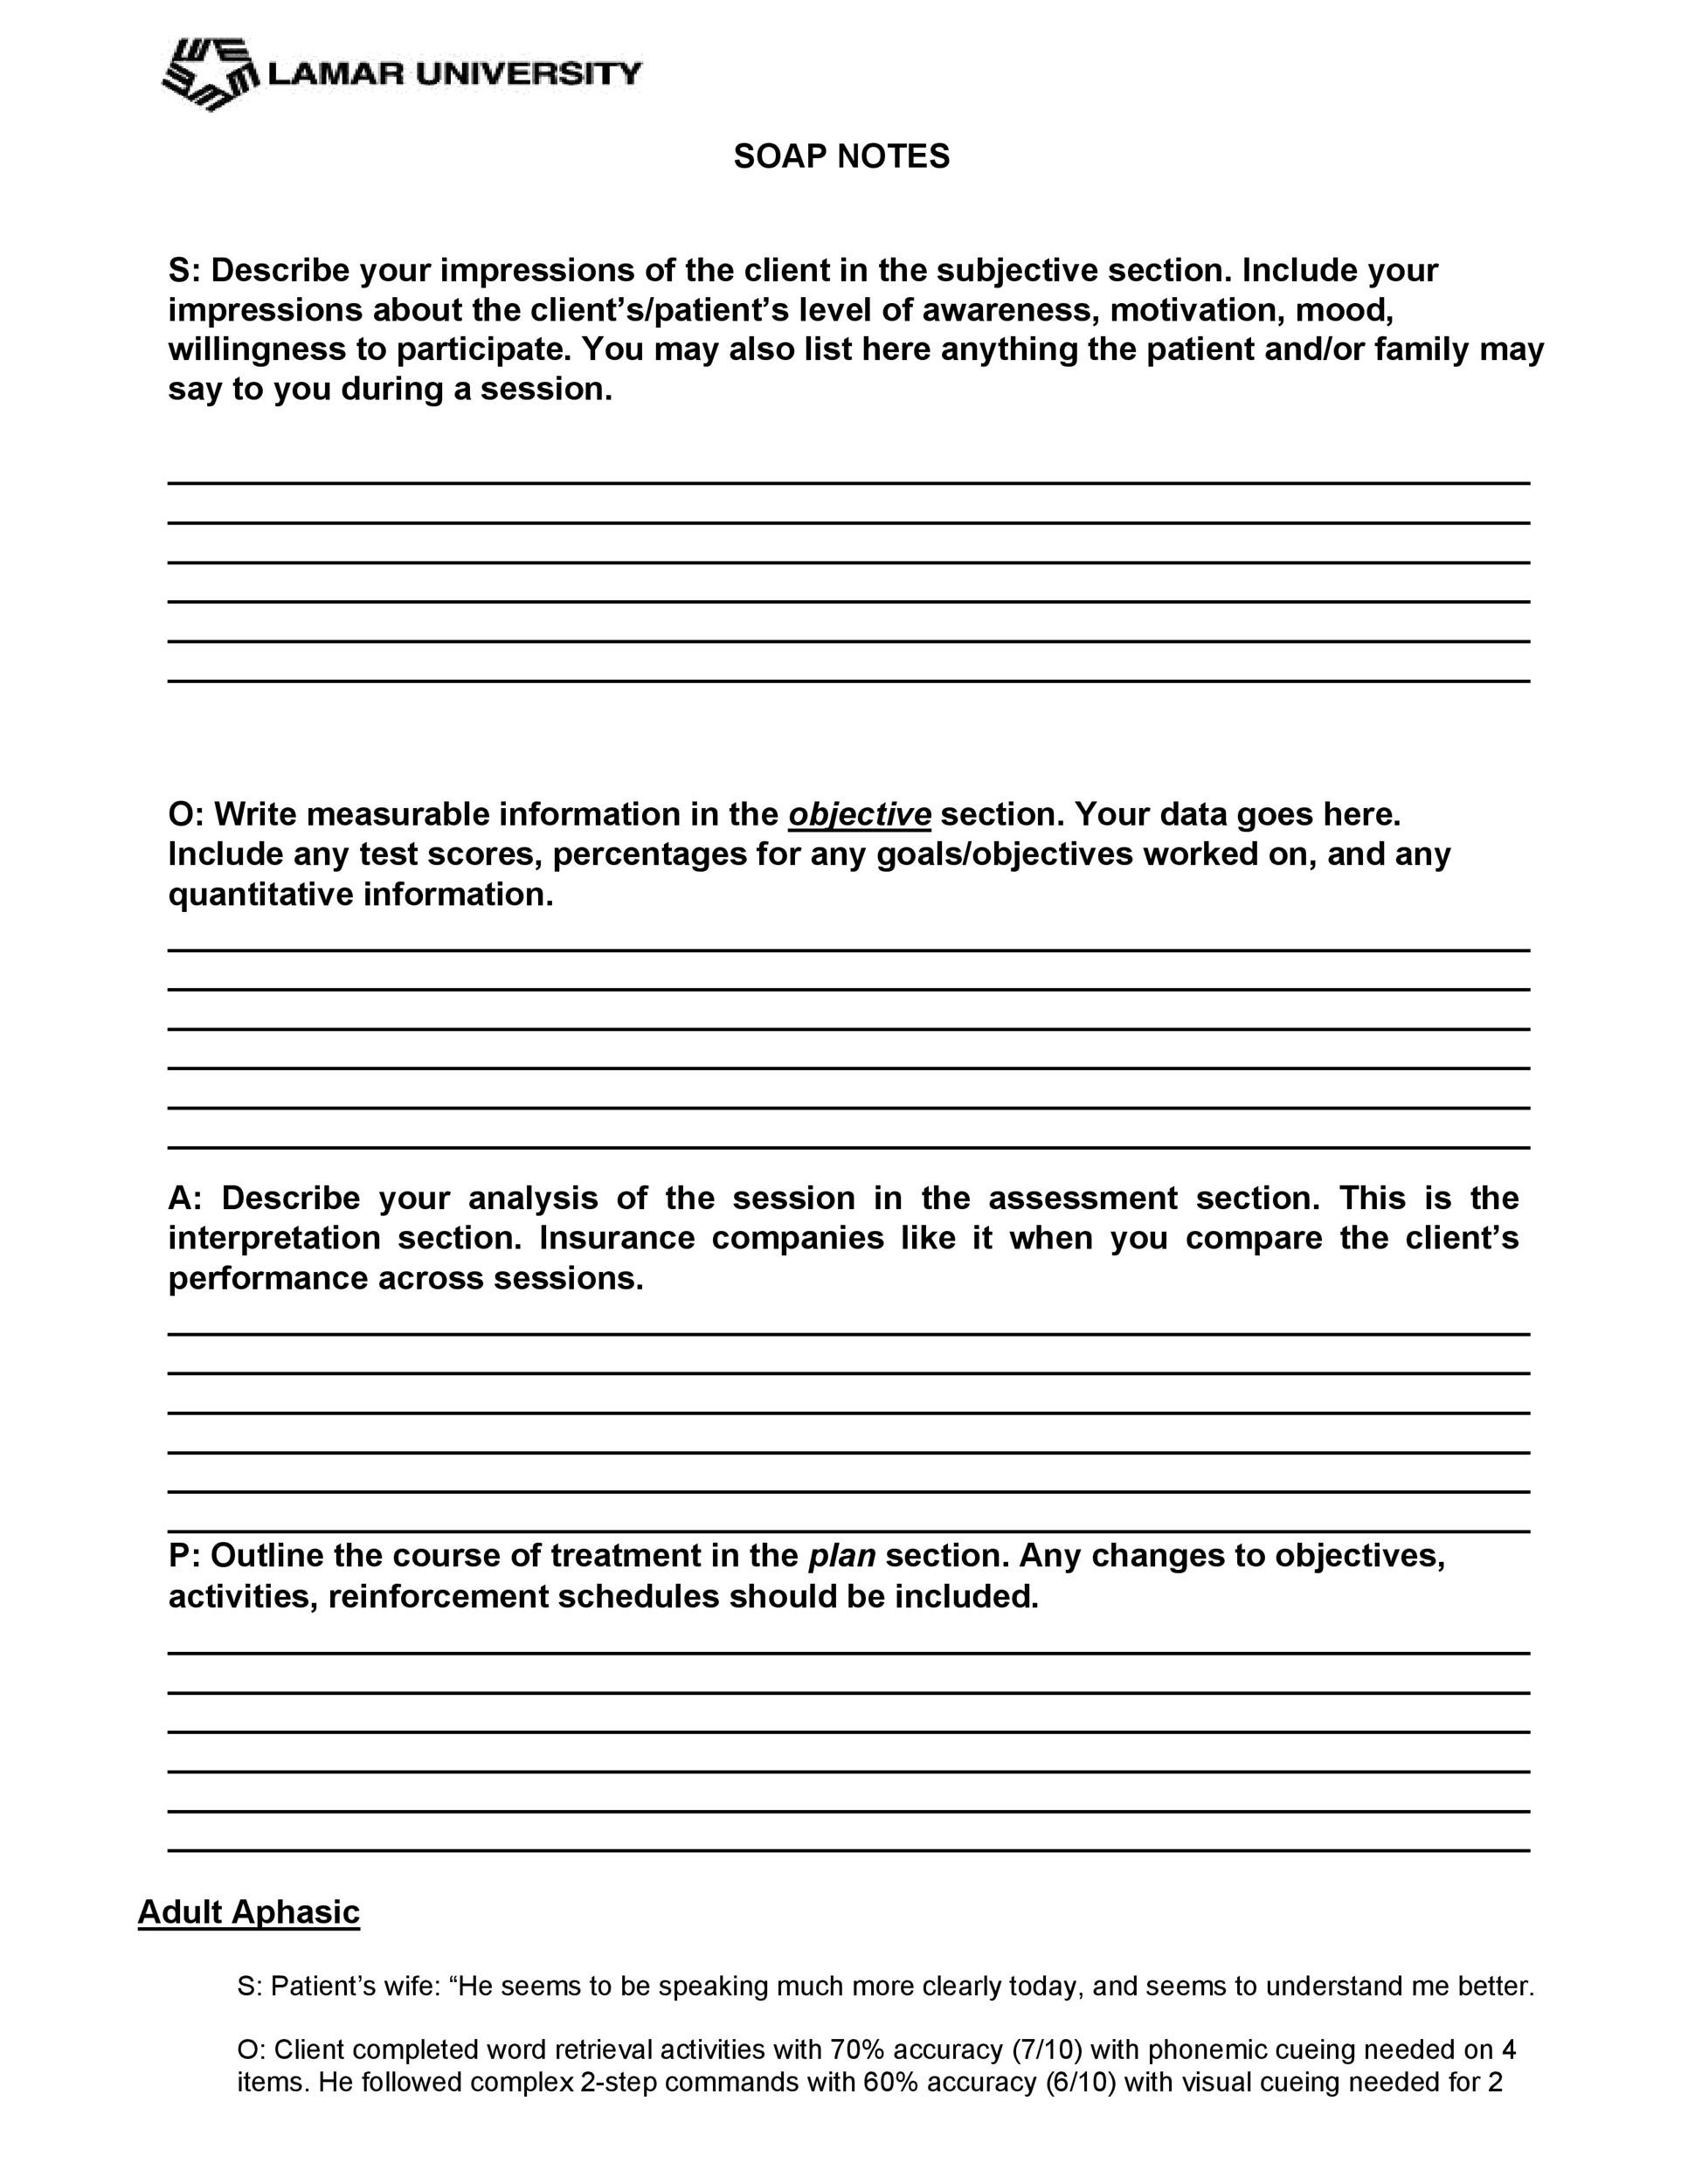 Free Soap Note Template 22